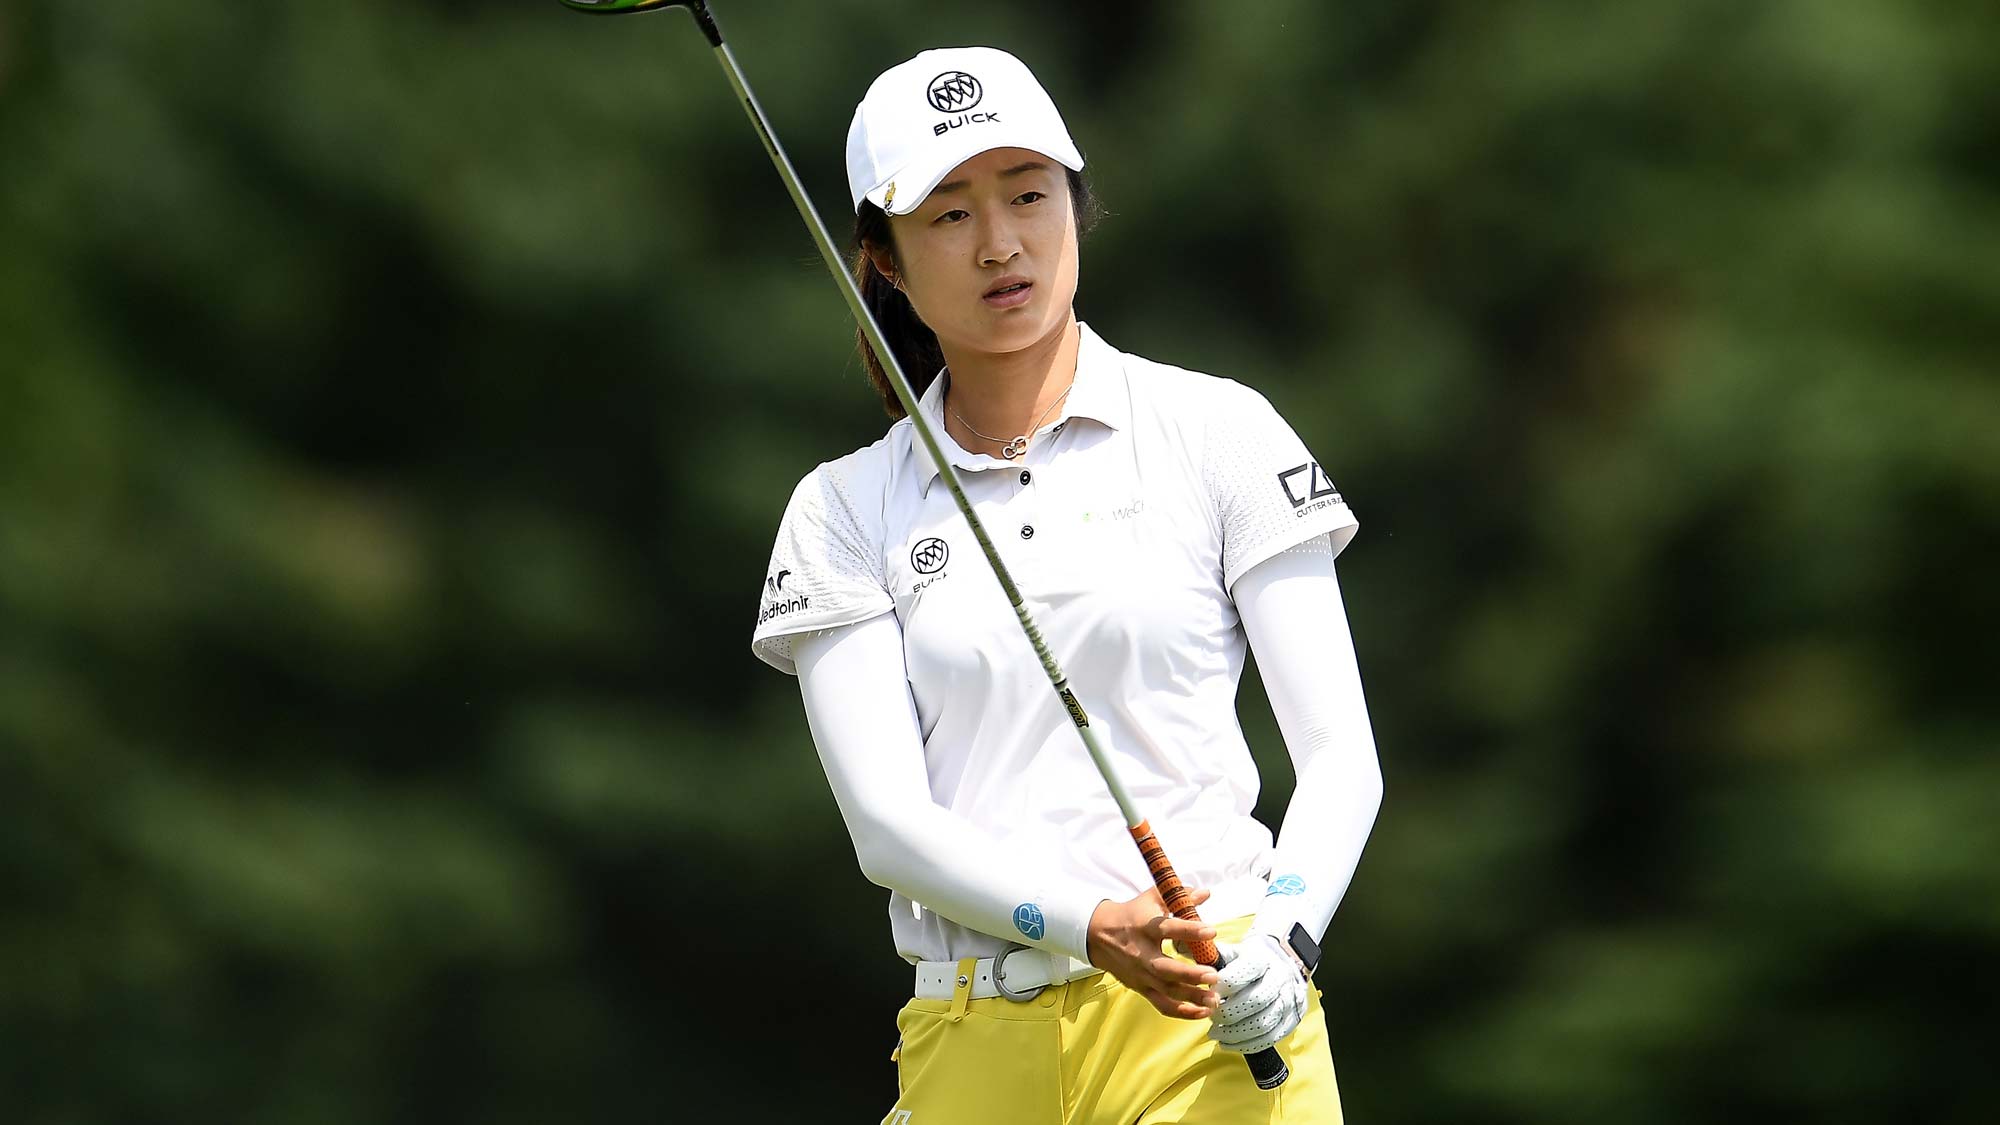  Yu Liu of China hits her tee shot on the ninth hole during the first round of the Thornberry Creek LPGA Classic